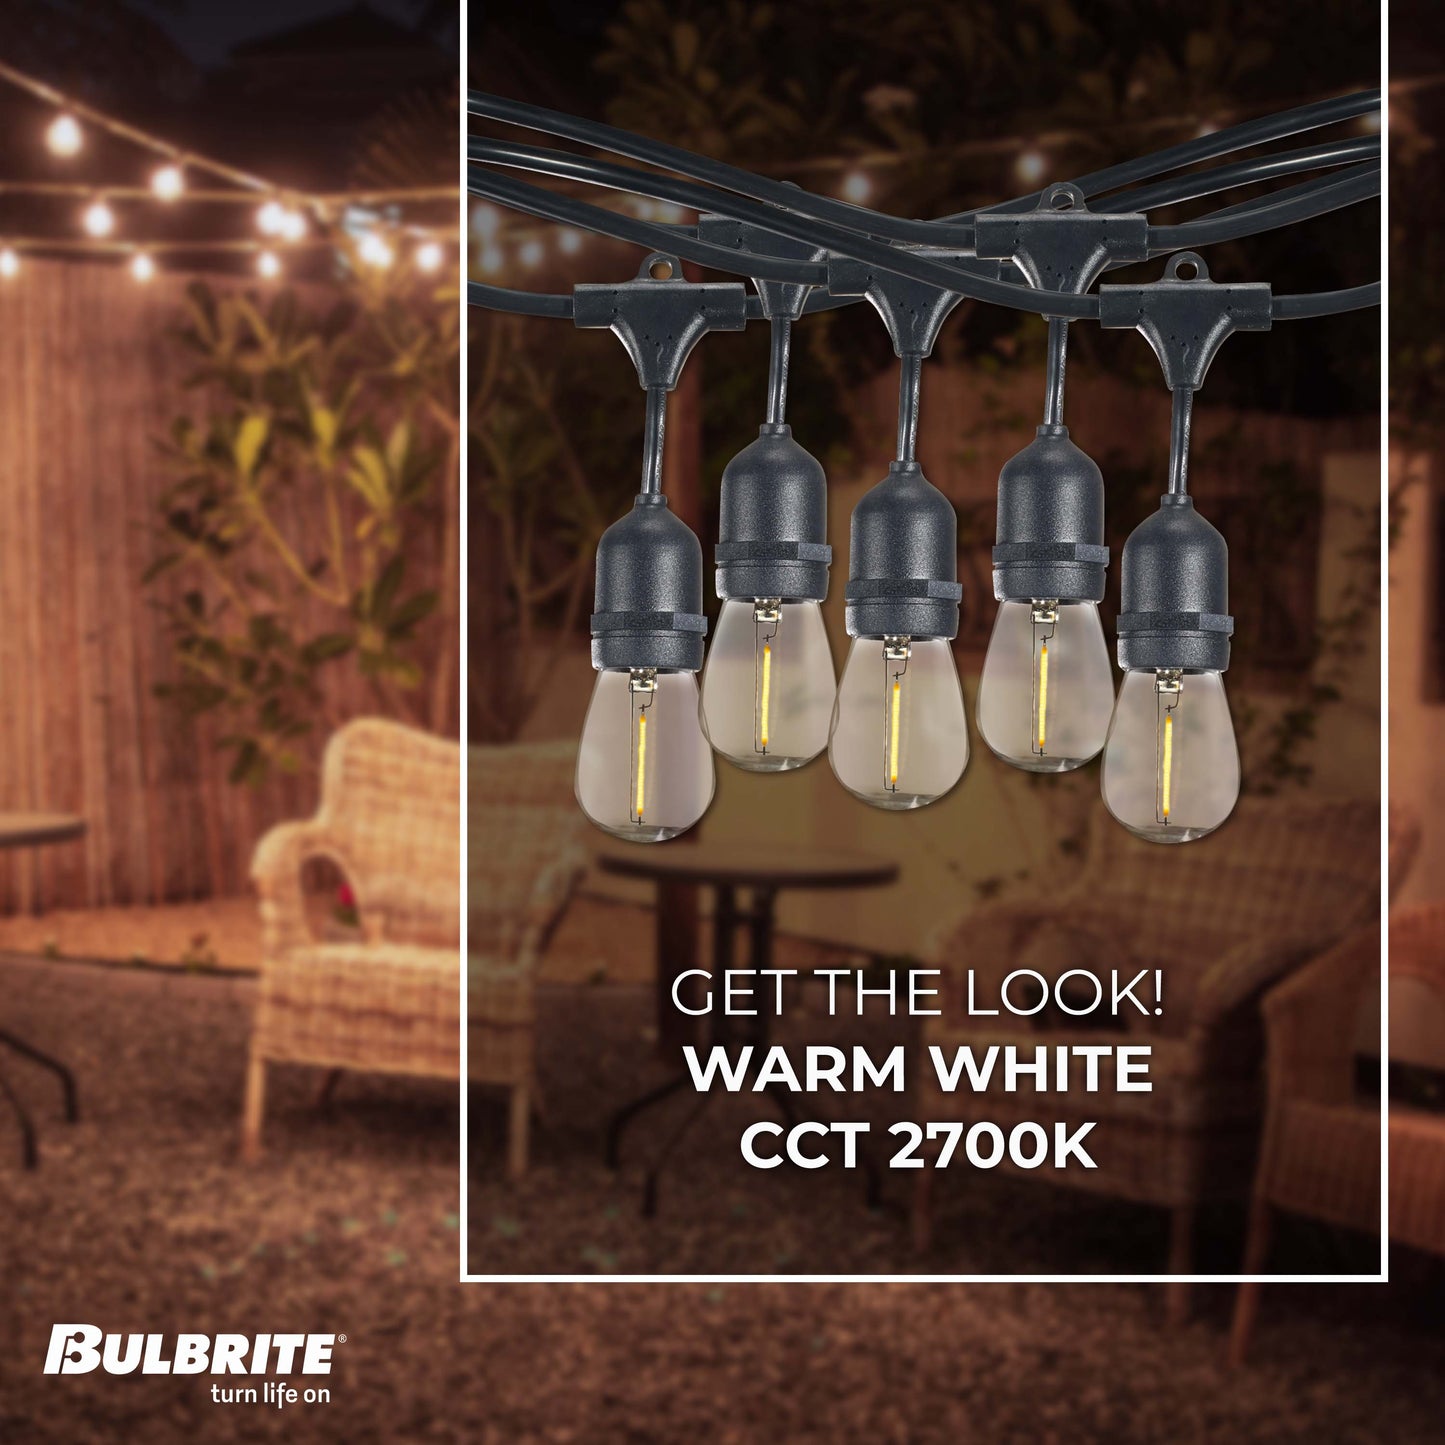 Bulbrite 30-foot String Light Kit with Clear Shatter Resistant Vintage Style S14 LED Light Bulbs